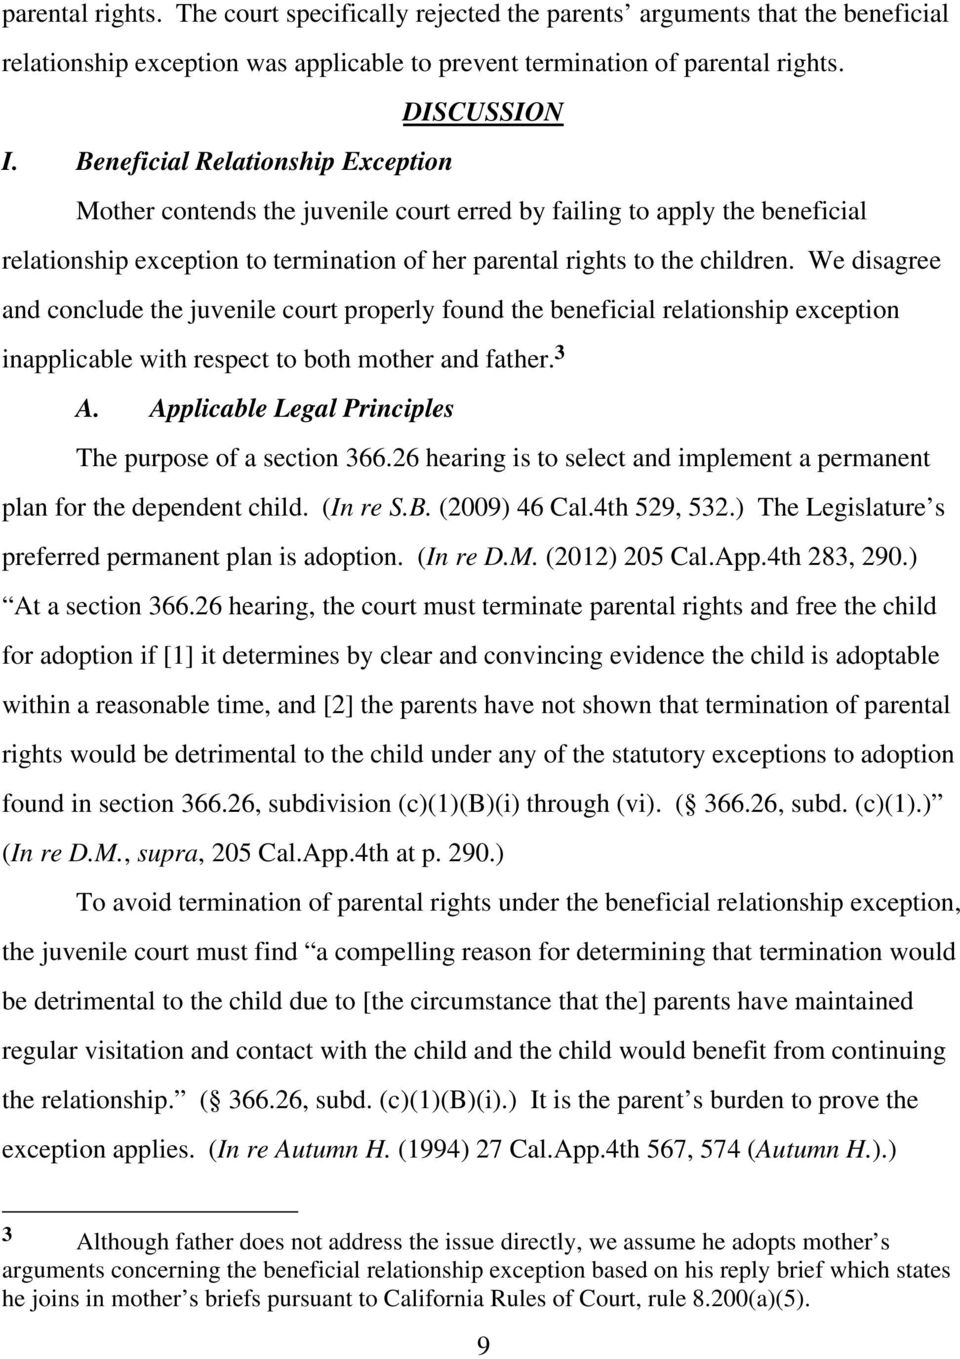 We disagree and conclude the juvenile court properly found the beneficial relationship exception inapplicable with respect to both mother and father. 3 A.